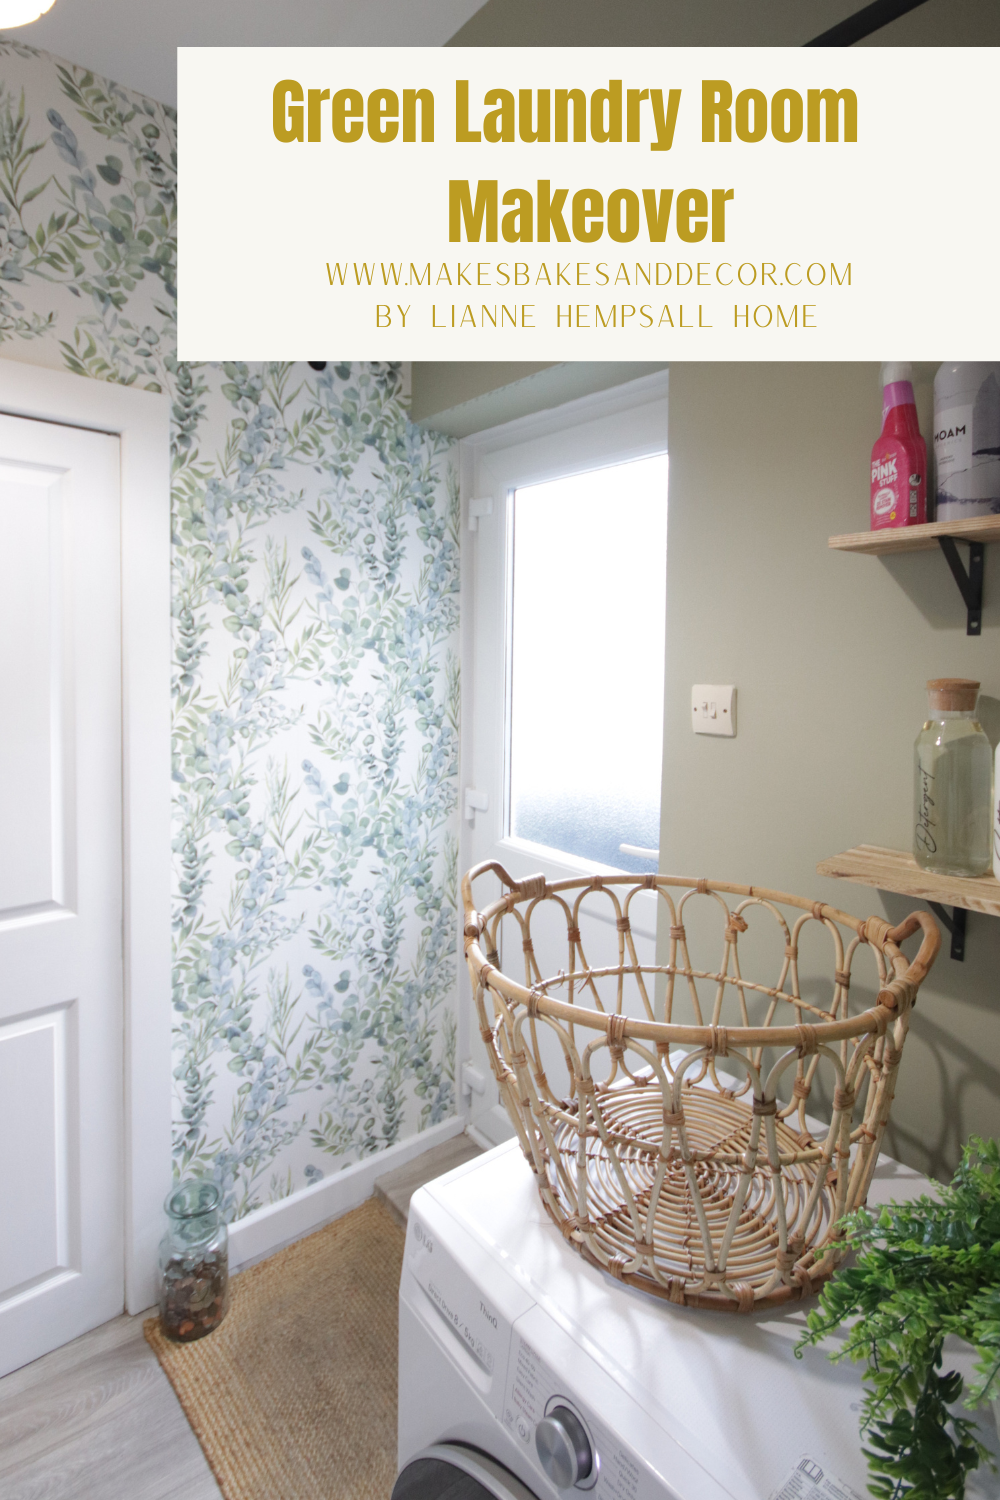 Green Laundry Room Makeover 